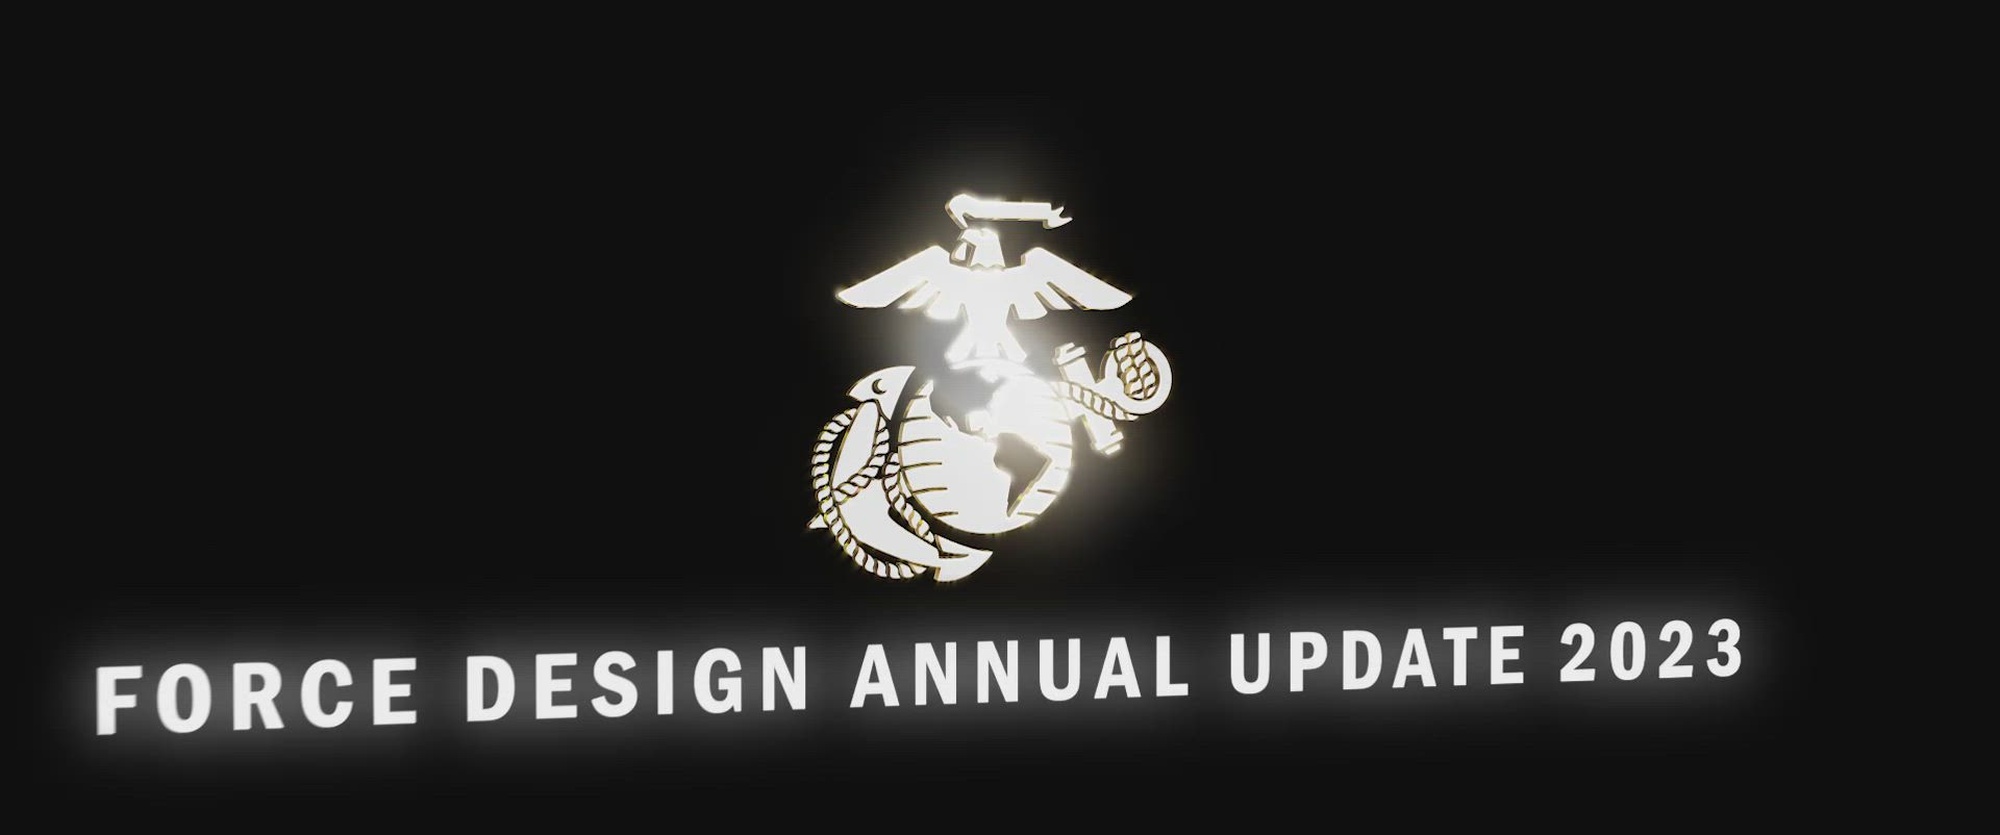 The Force Design Annual Update 2023 outlines the Marine Corps’ continued modernization and provides a framework for priorities moving forward. 

With further experimentation and wargaming with concepts such as The Tentative Manual for Expeditionary Advanced Based Operations, A Concept for Stand-In Forces, the guiding documents Training and Educations 2030, the updated Talent Management 2030 and Installations and Logistics 2030, the Marine Corps is already implementing elements of Force Design and our Marines now use many of the capabilities it describes. 

We know that if we are to stay ahead of our peer competitors, we need to accelerate our modernization.